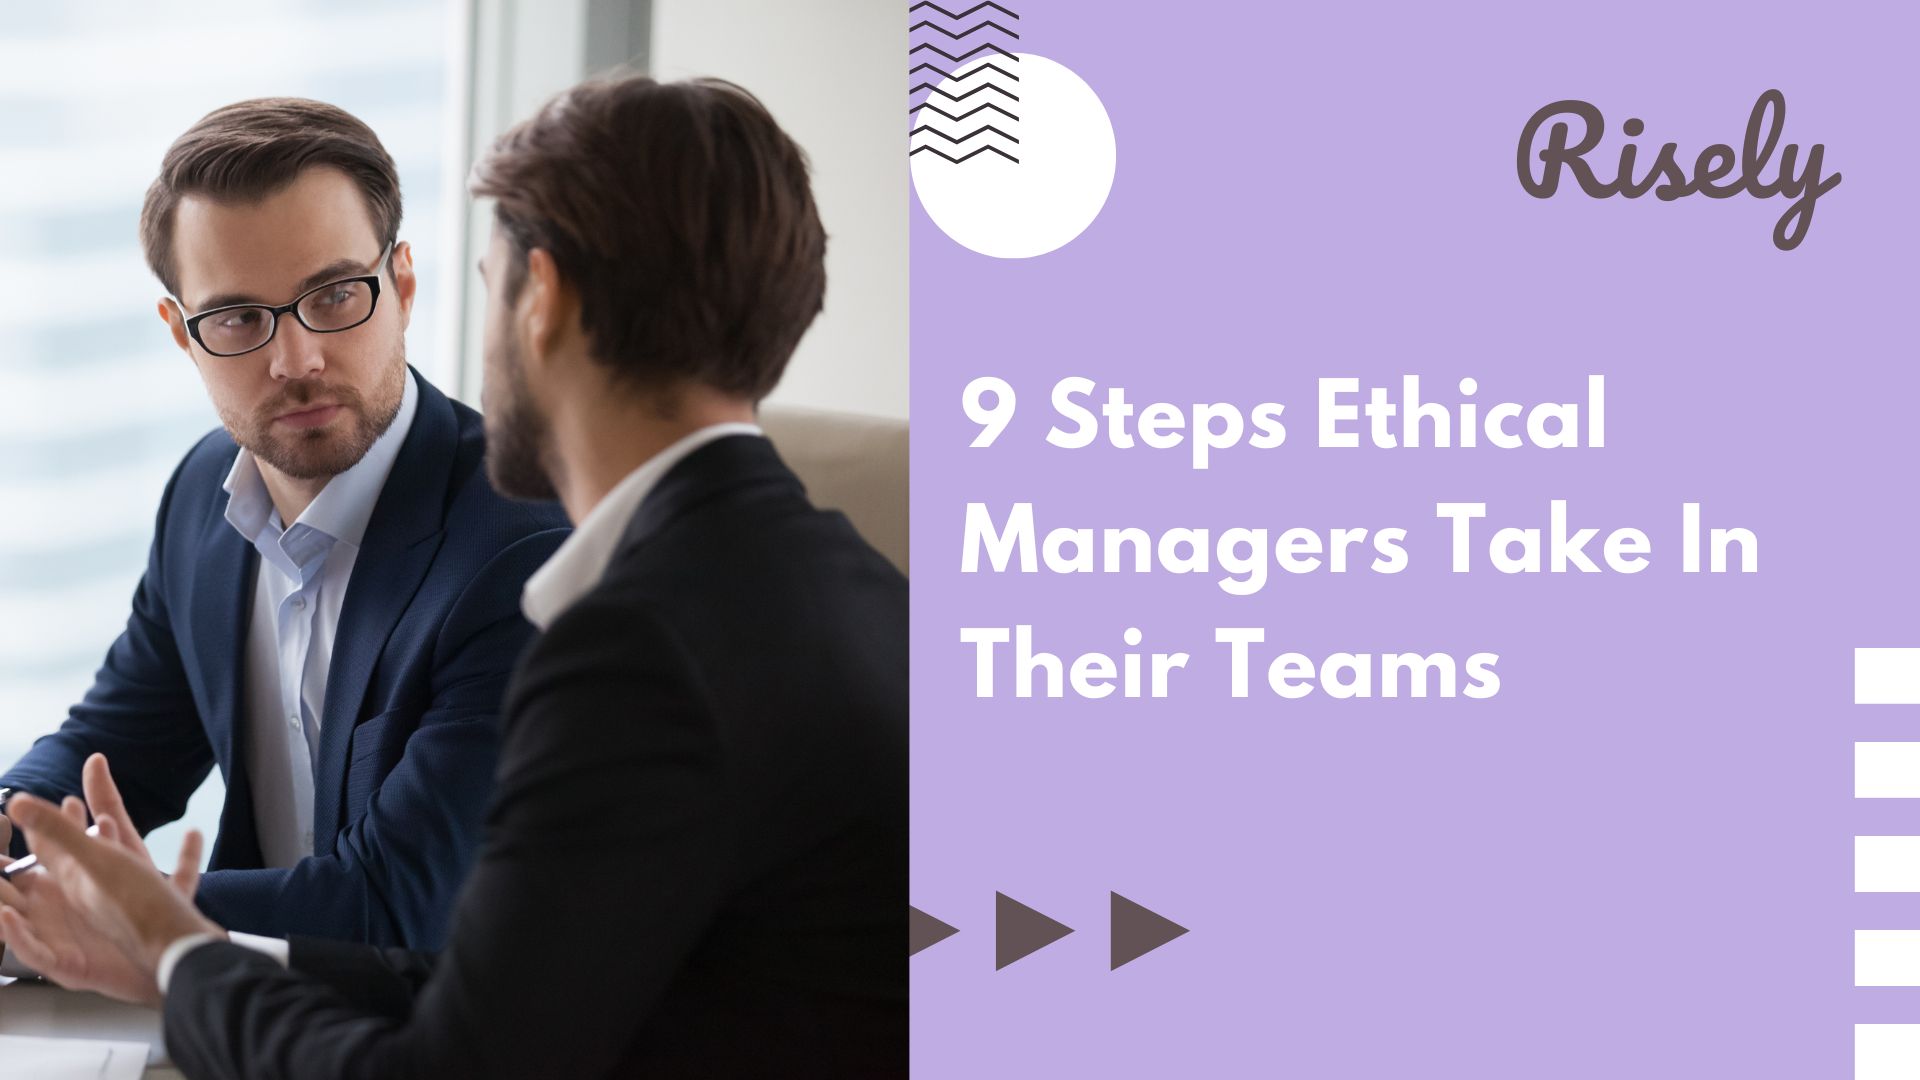 9 Steps Ethical Managers Take In Their Teams